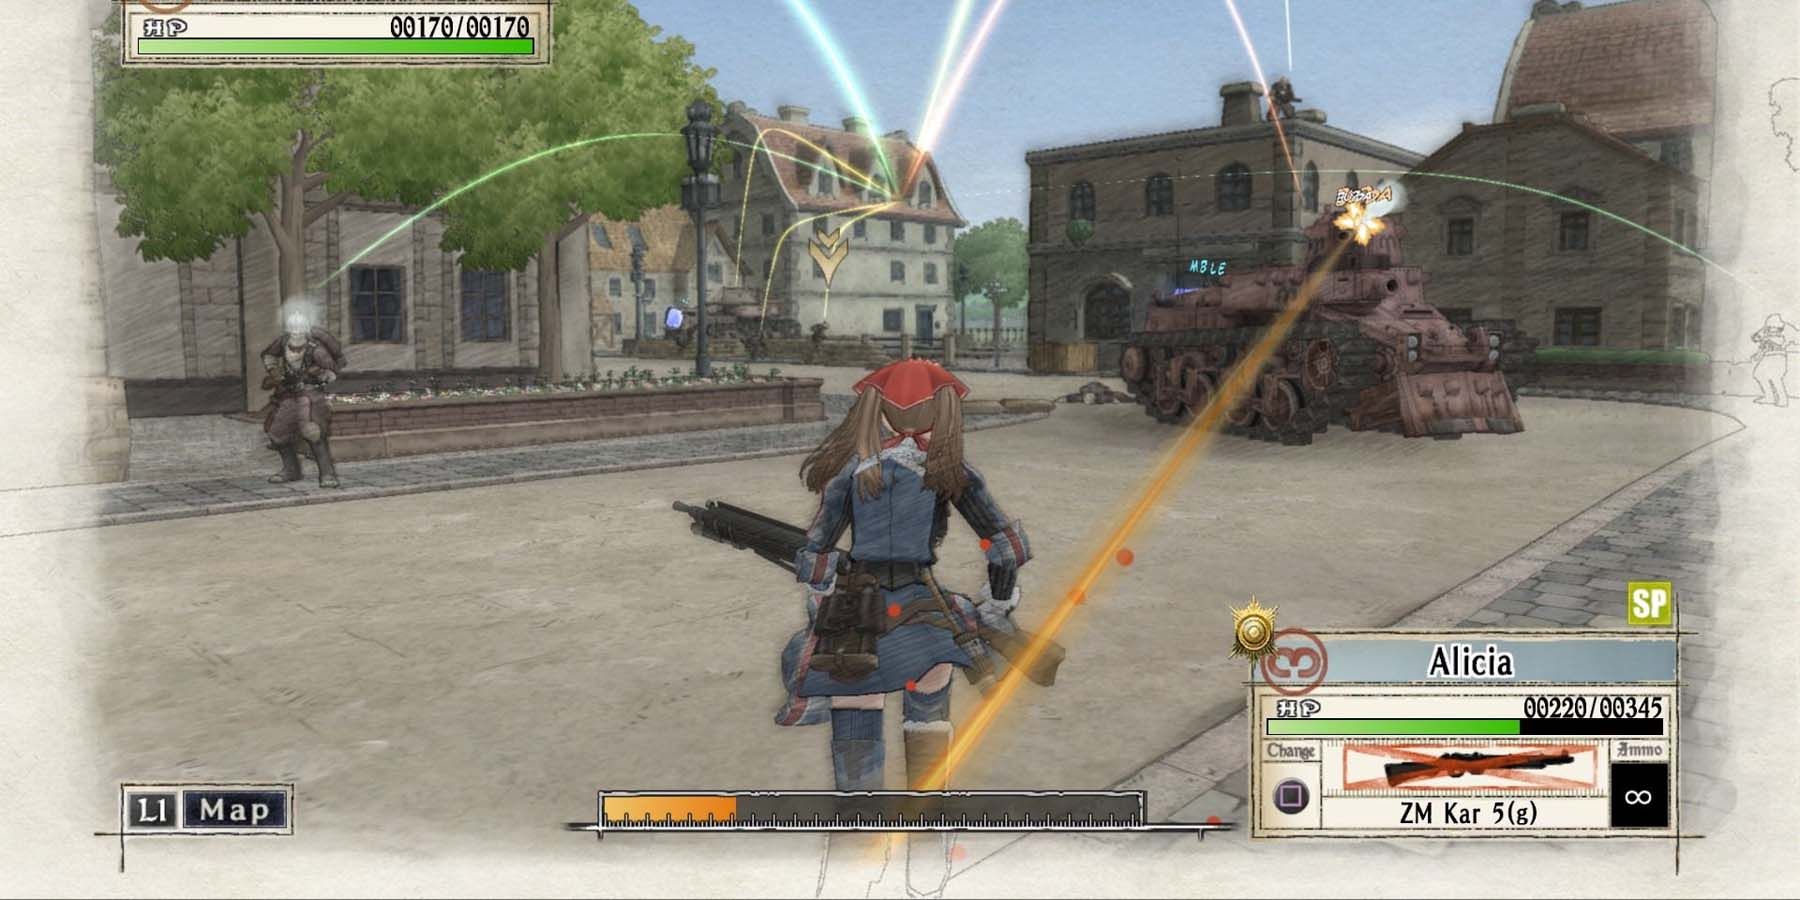 Valkyria Chronicles Remastered Alicia shot at by tank